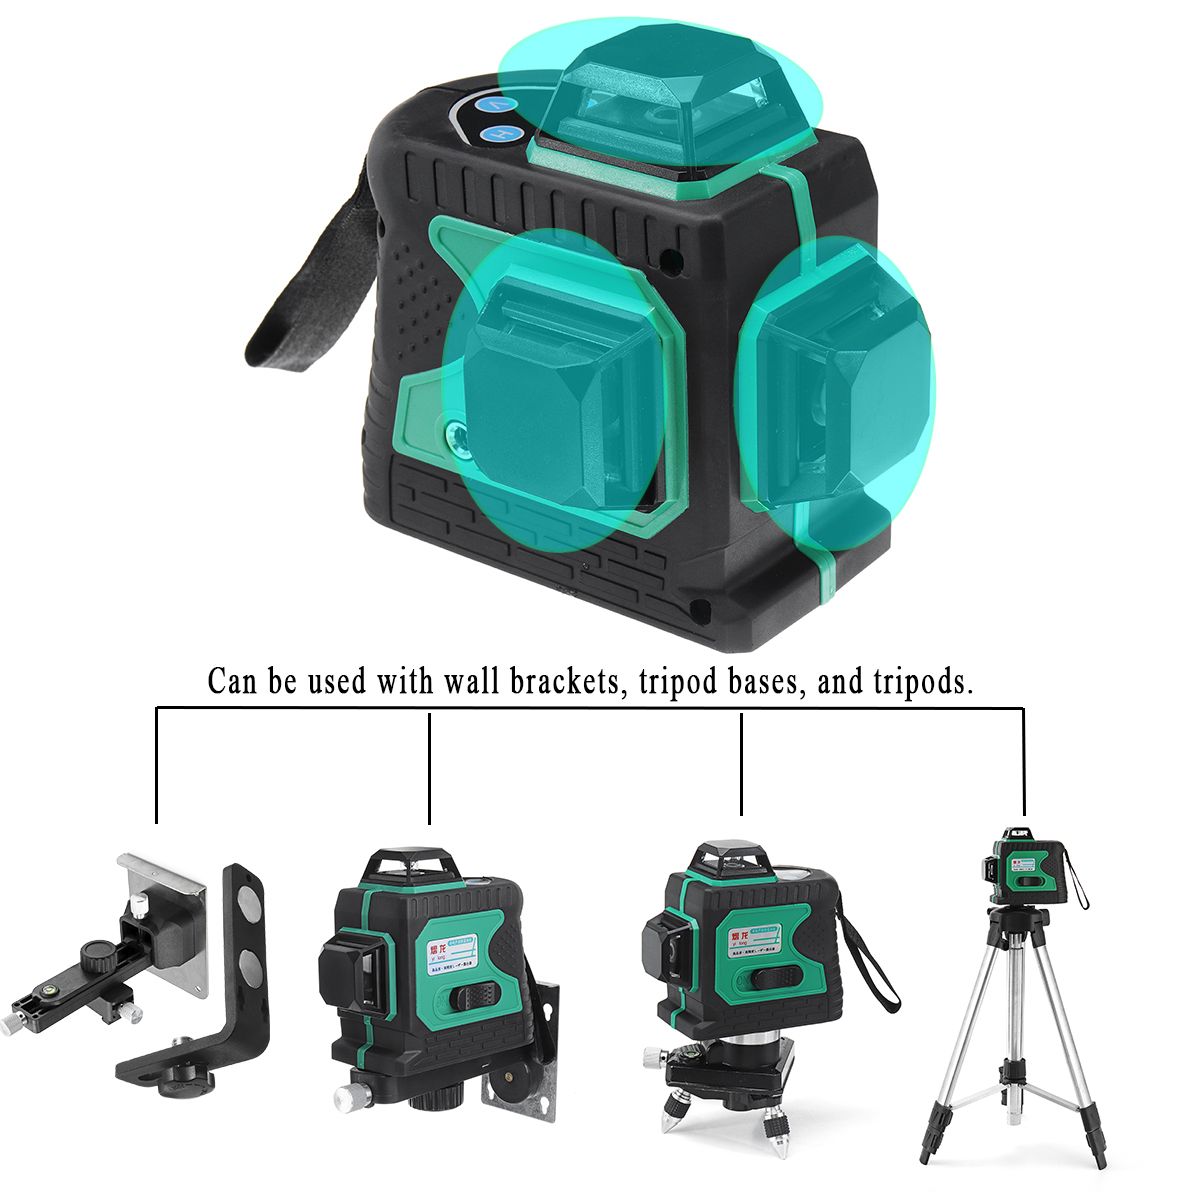 Blue-green-Light-12-line-Outdoor-Strong-Laser-Level-Infrared-Light-High-precision-Automatic-1445383